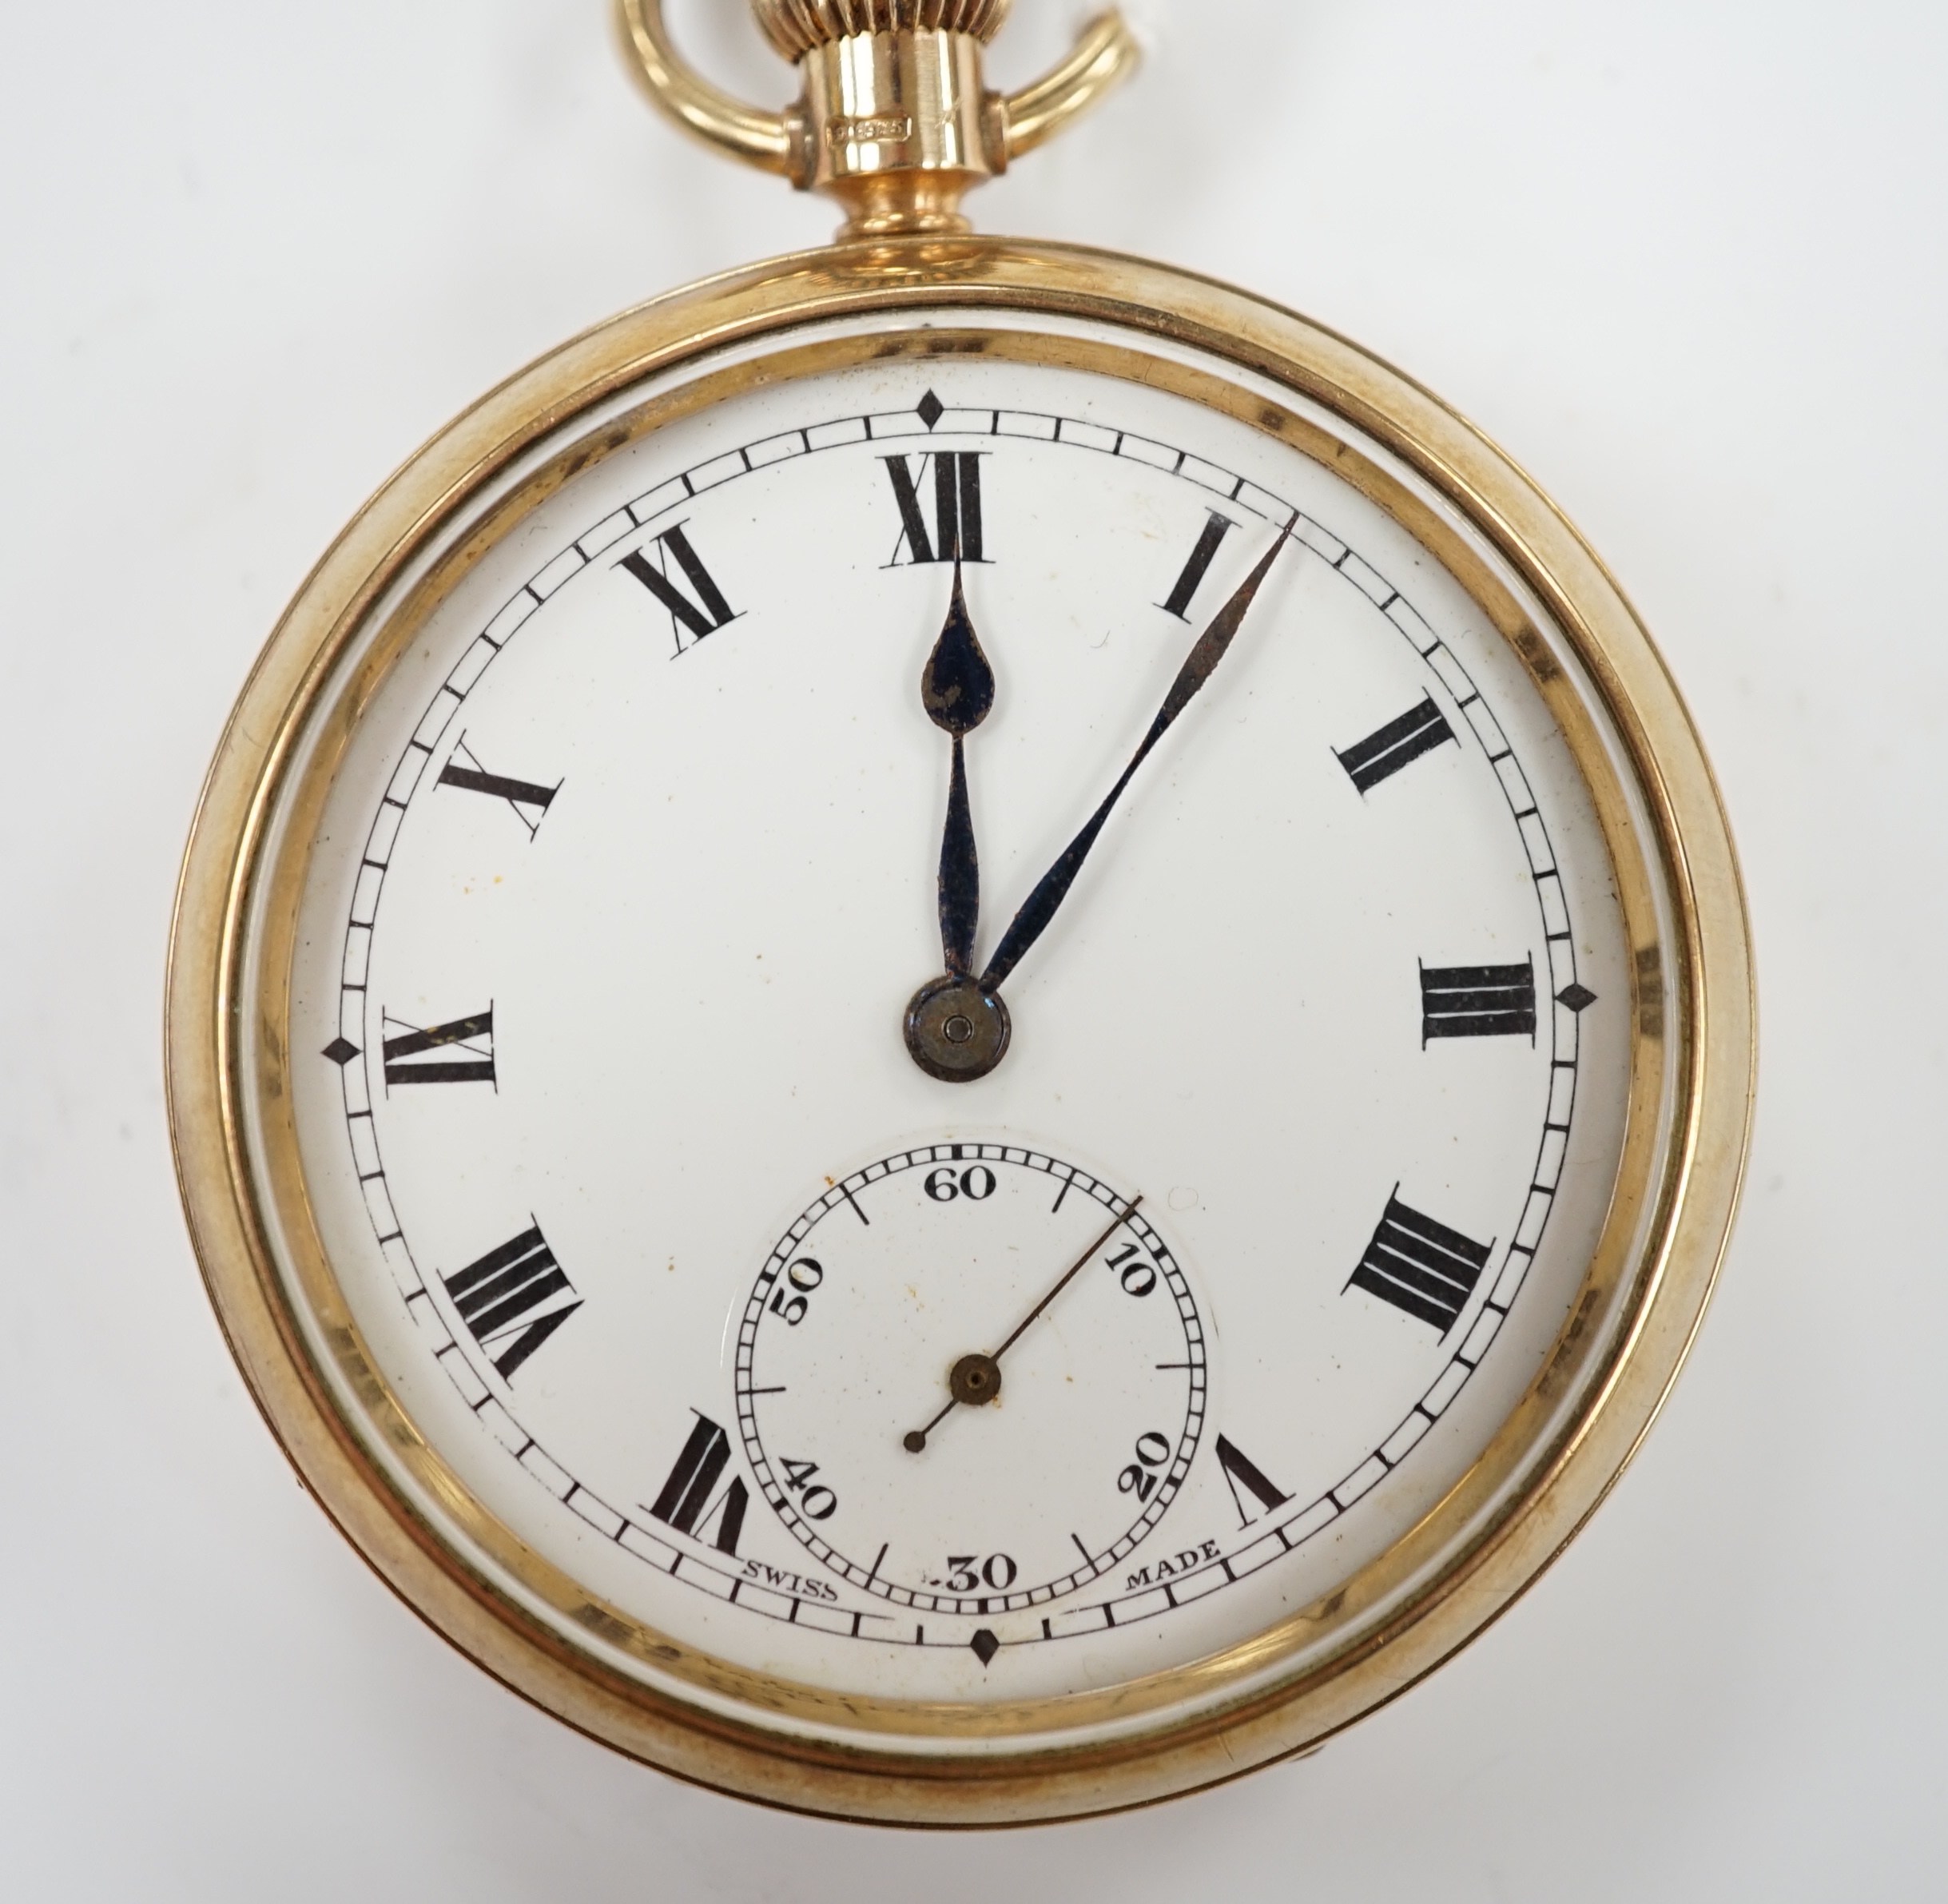 A George V 9ct gold open face keyless pocket watch, with Roman dial and subsidiary seconds, case diameter 50mm, gross weight 91.7 grams.